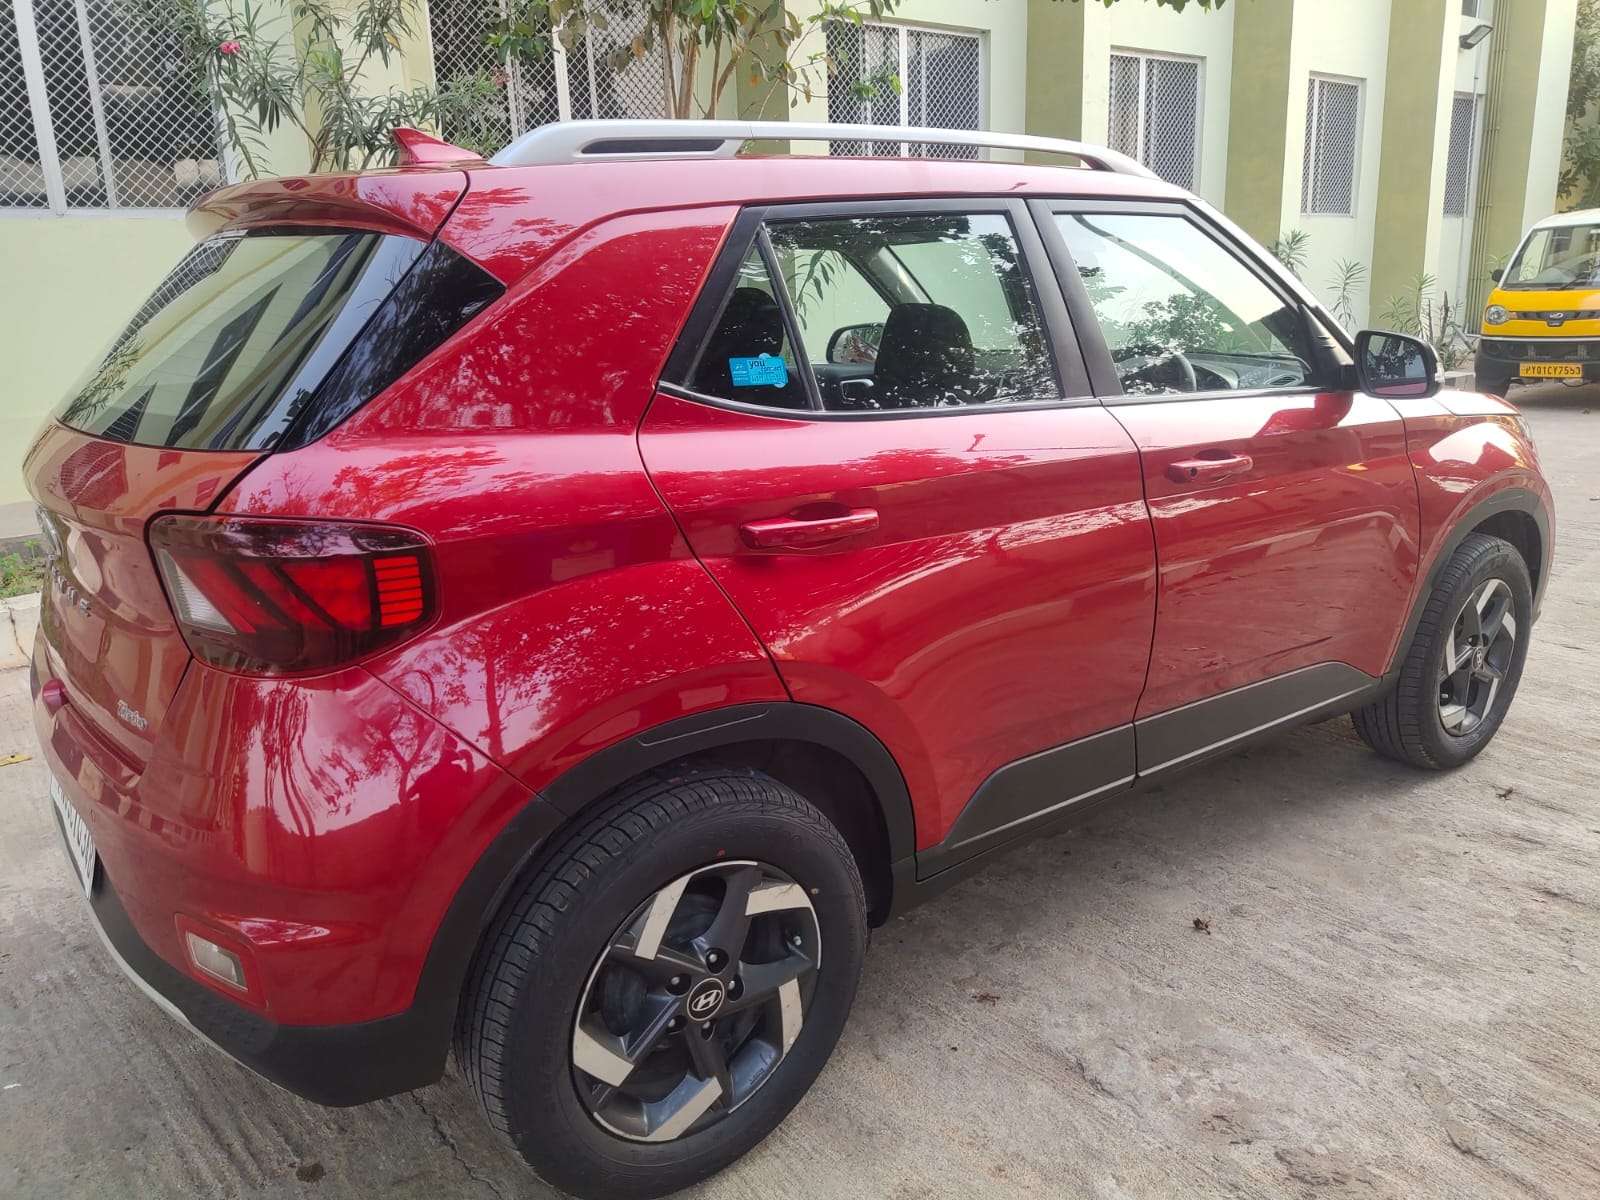 2758-for-sale-Hyundai-Venue-Petrol-First-Owner-2019-TN-registered-rs-934999